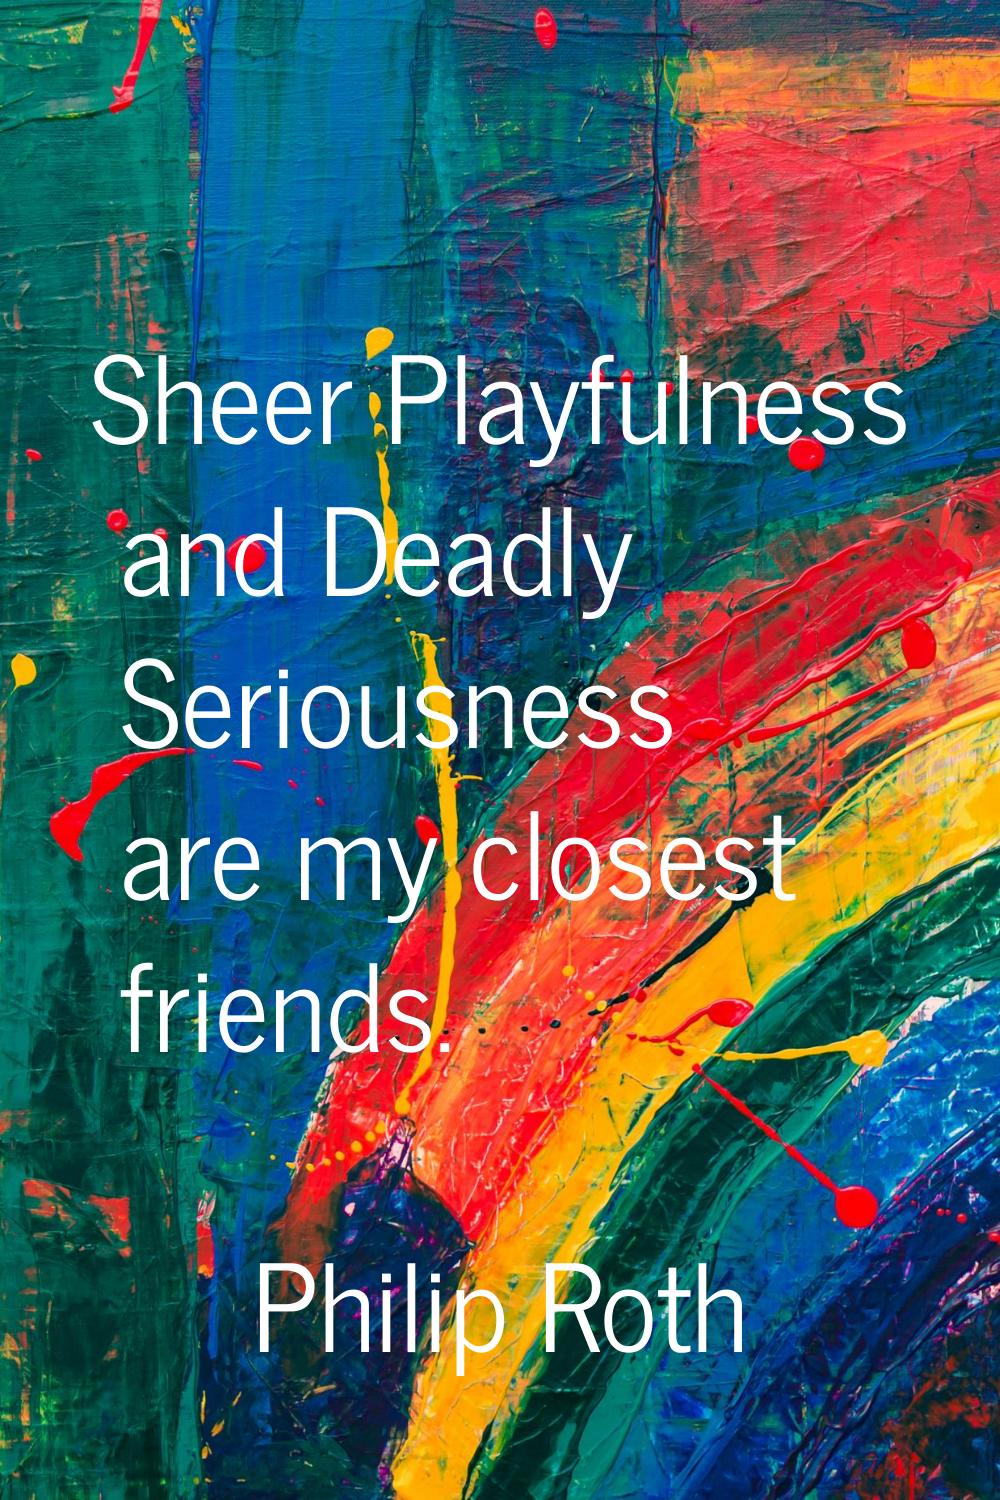 Sheer Playfulness and Deadly Seriousness are my closest friends.